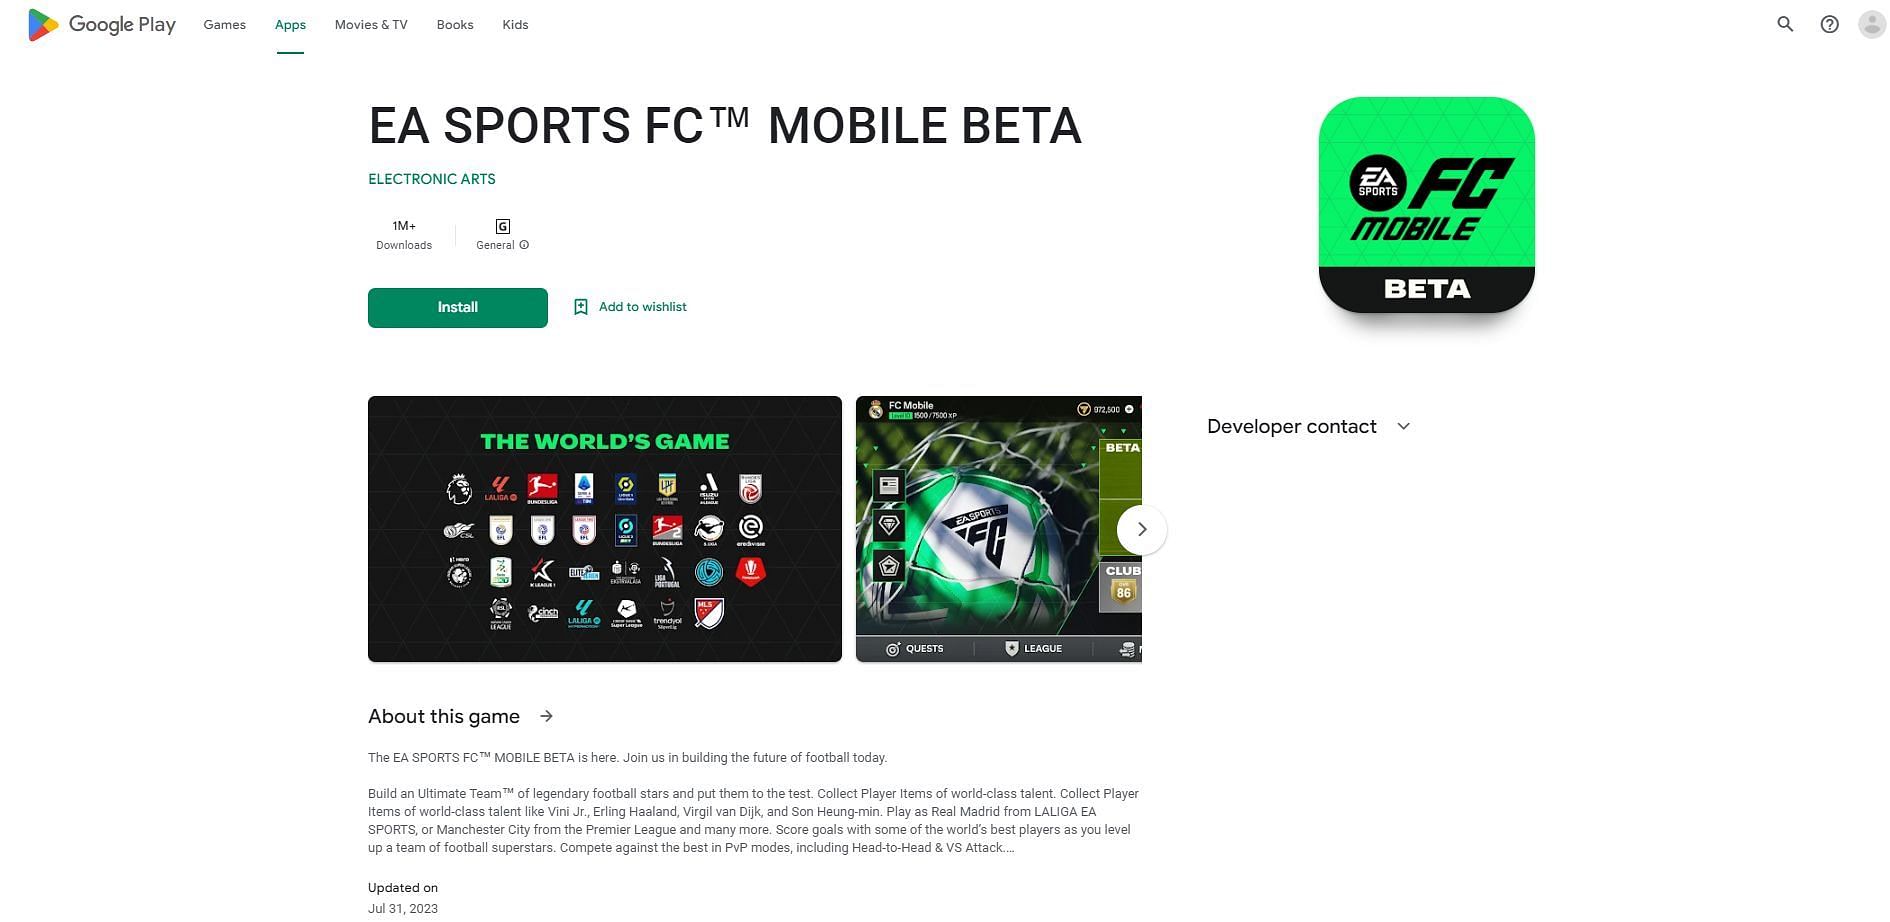 EA FC Mobile: All clubs available in the limited beta